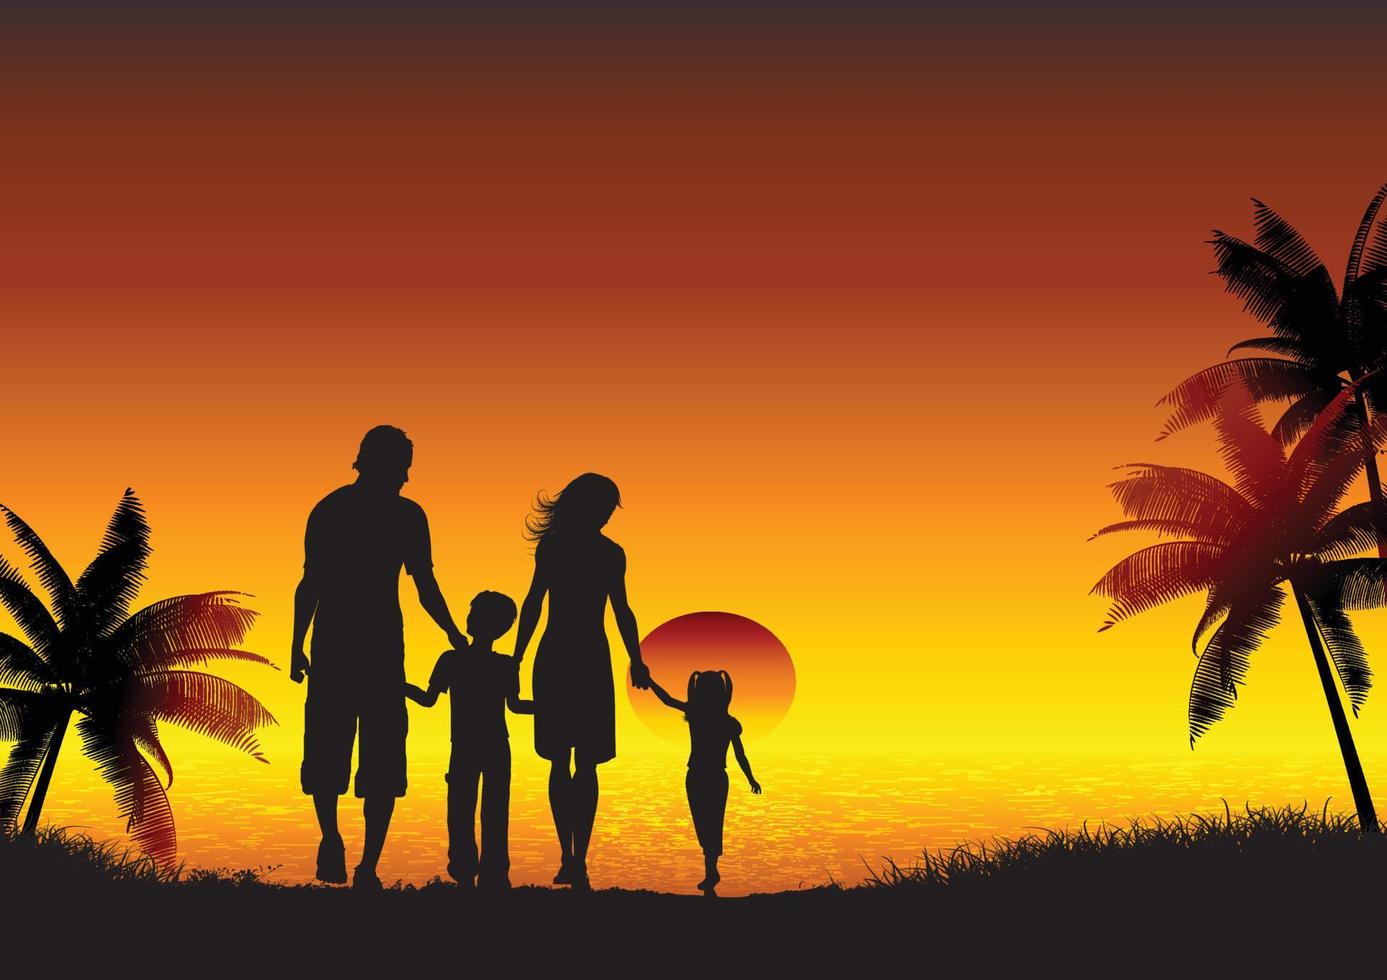 Silhouette family standing at sunset vector